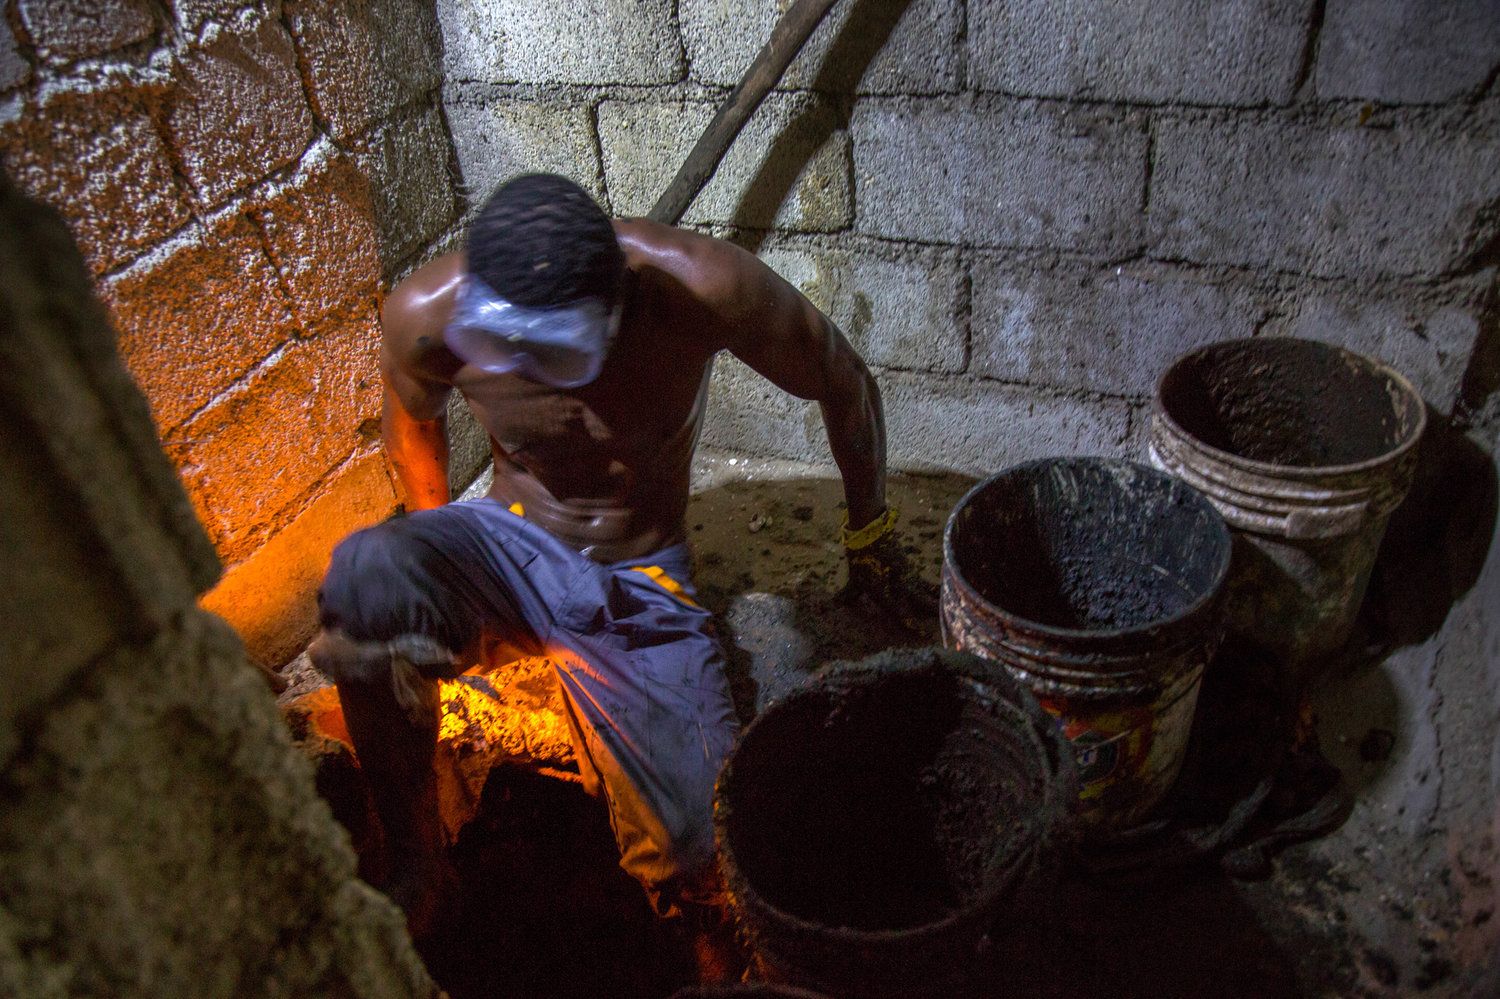 Gabriel Toto, 35, has been working as a bayakou, or latrine cleaner, for a decade. On nights without a journalist watching, he generally works naked. Image by Marie Arago/NPR. Haiti, 2017.